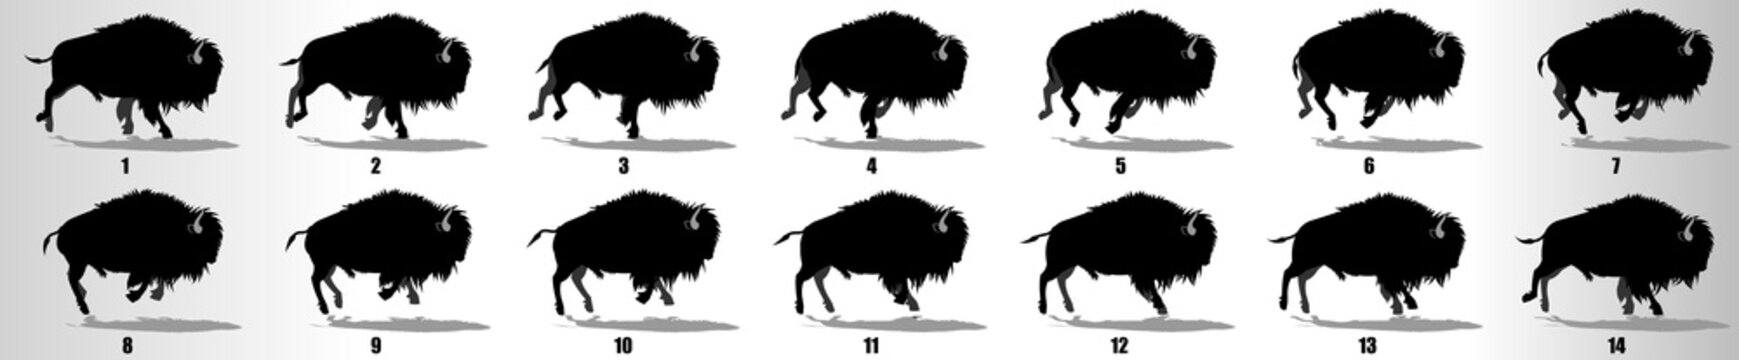 Bison Run cycle animation frames silhouette, loop animation sequence sprite sheet 